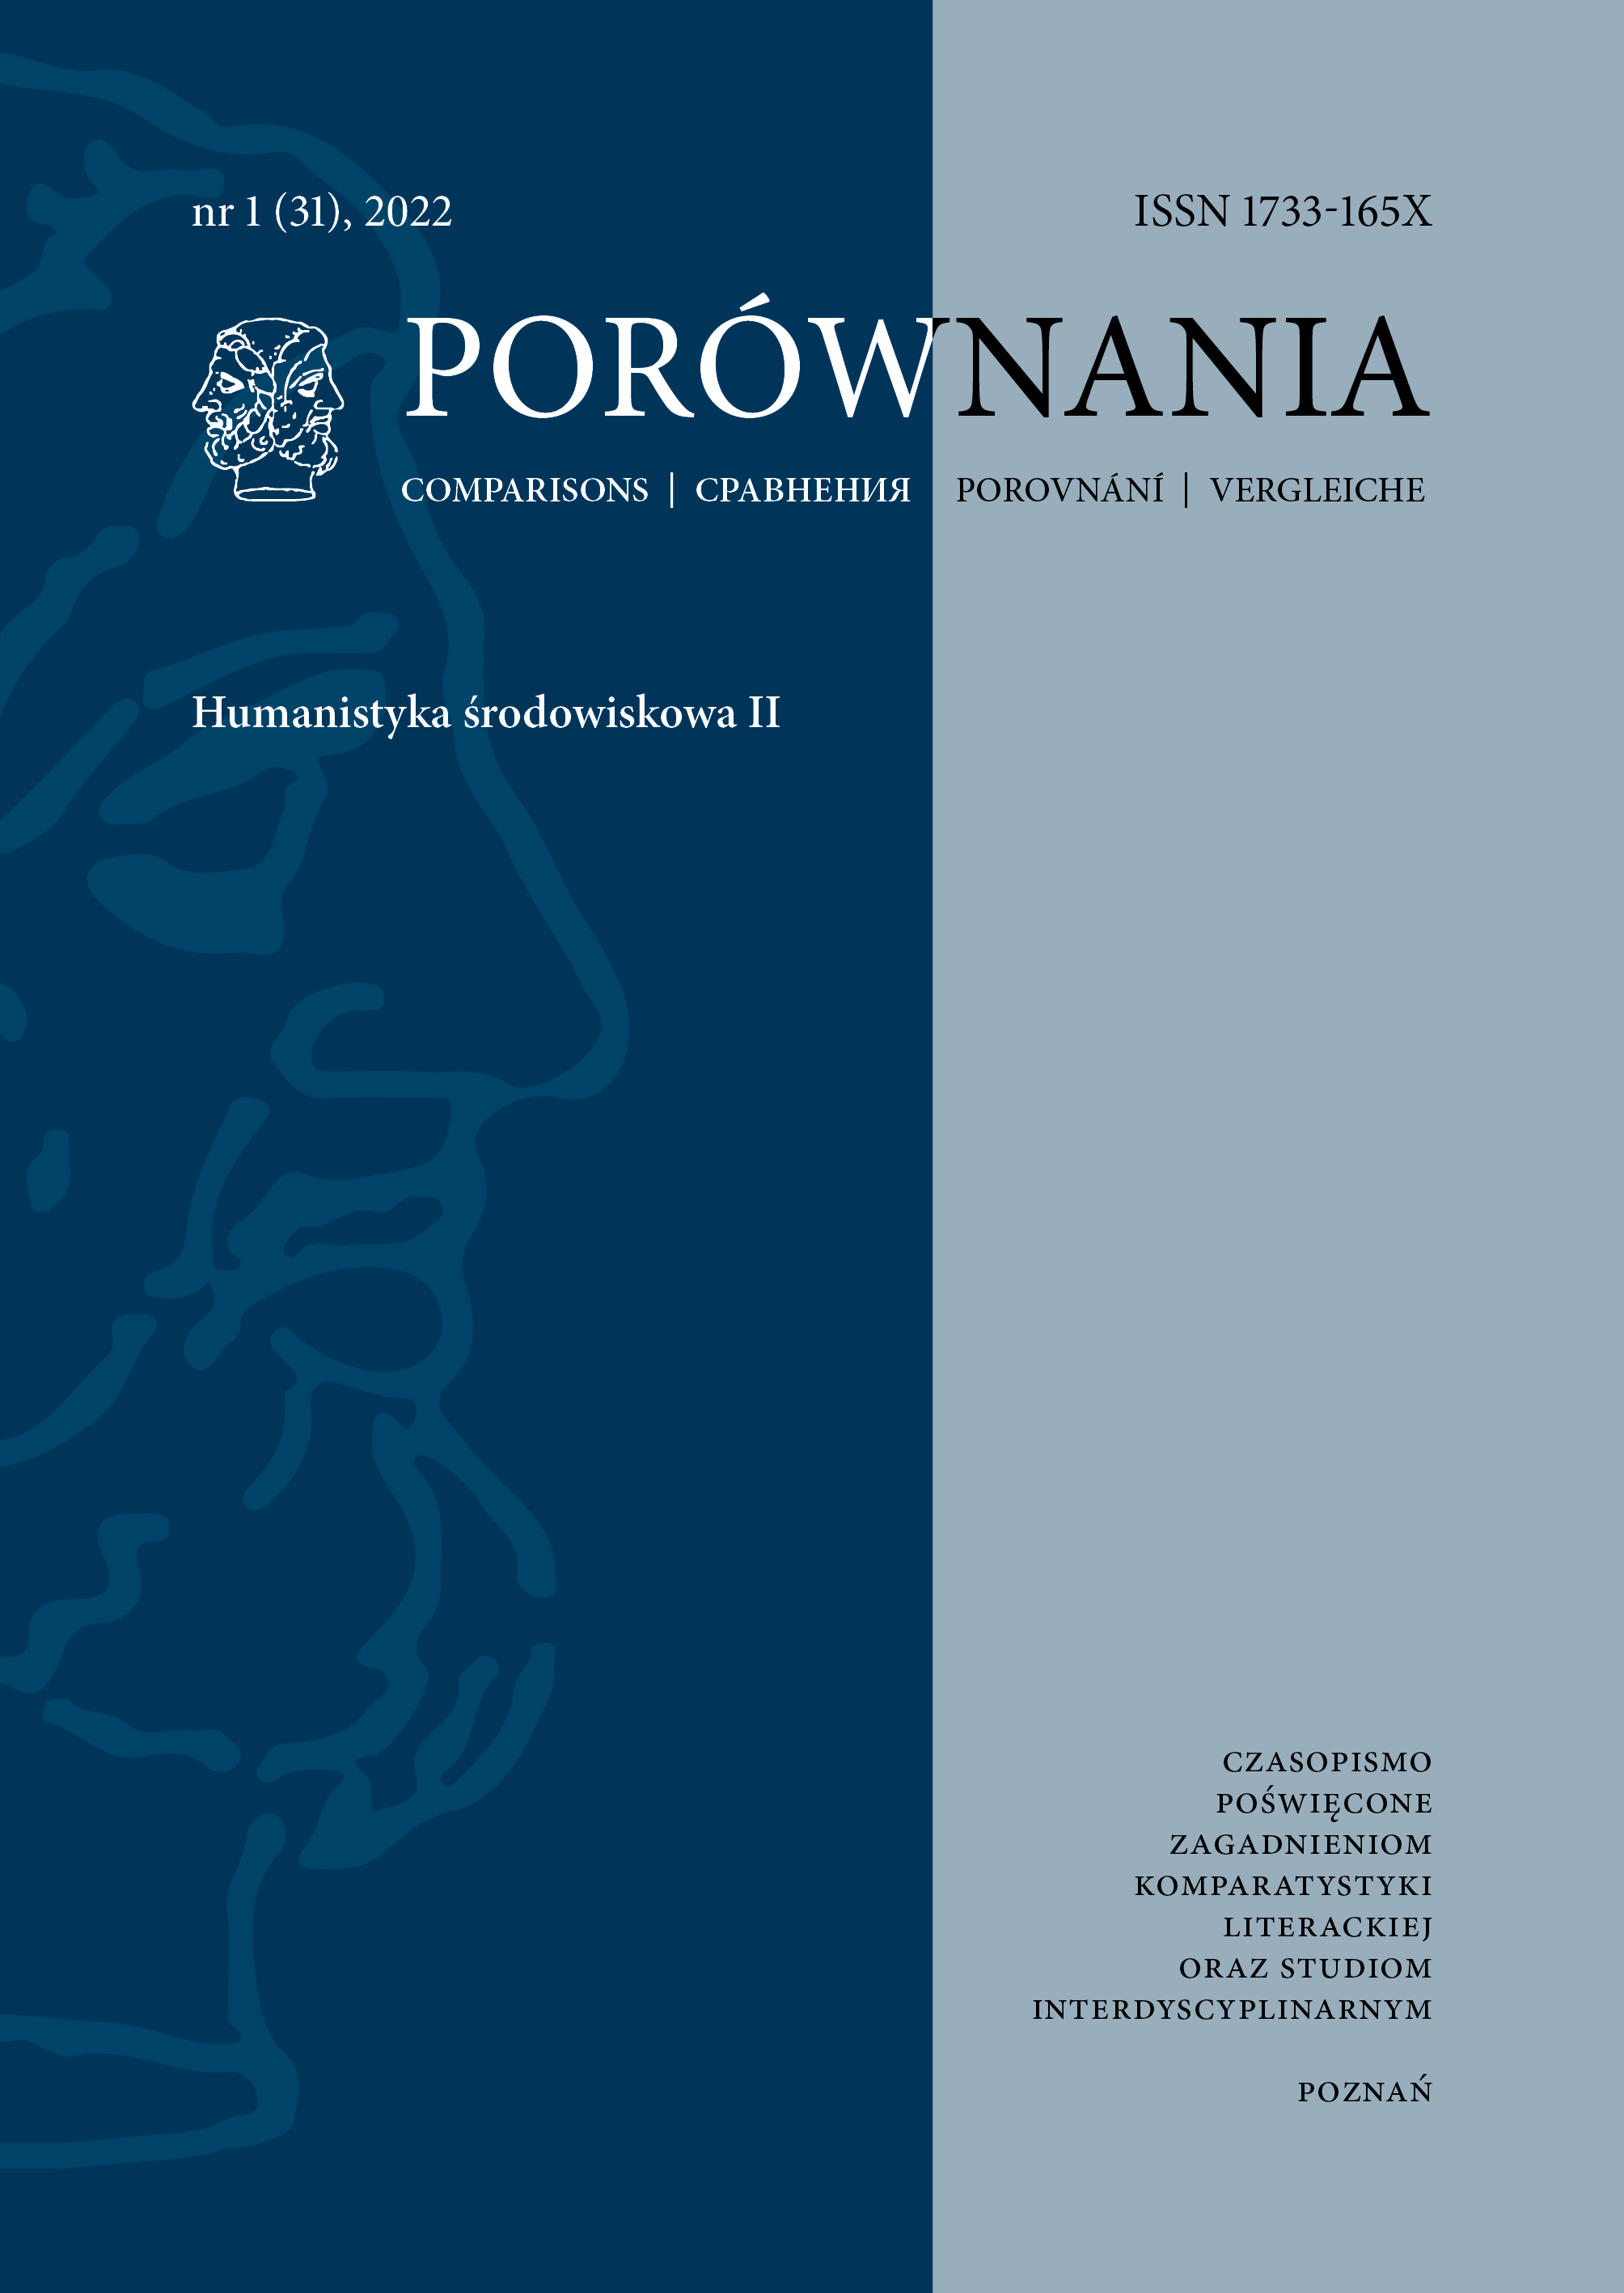 Central European Cultural Transfers in the Humanism and Baroque Periods: Three Examples from Literary History Cover Image